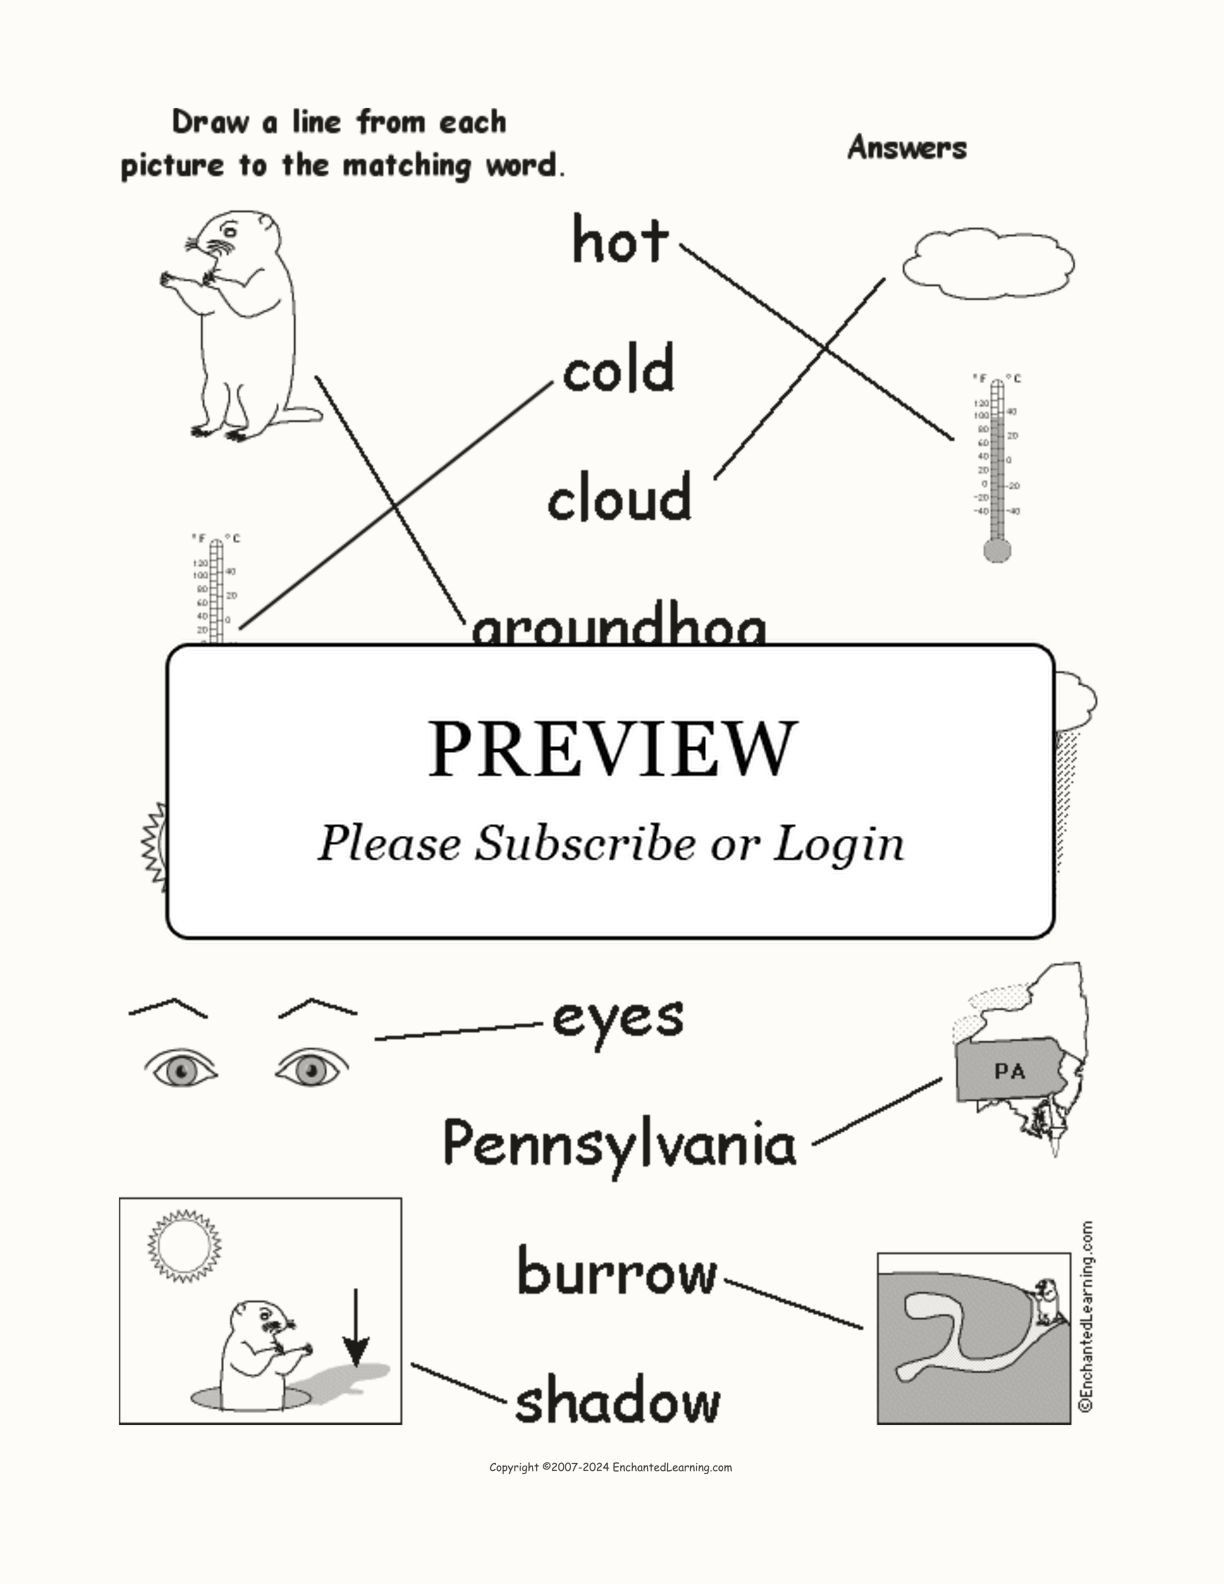 Groundhog Day - Match the Words to the Pictures interactive worksheet page 2